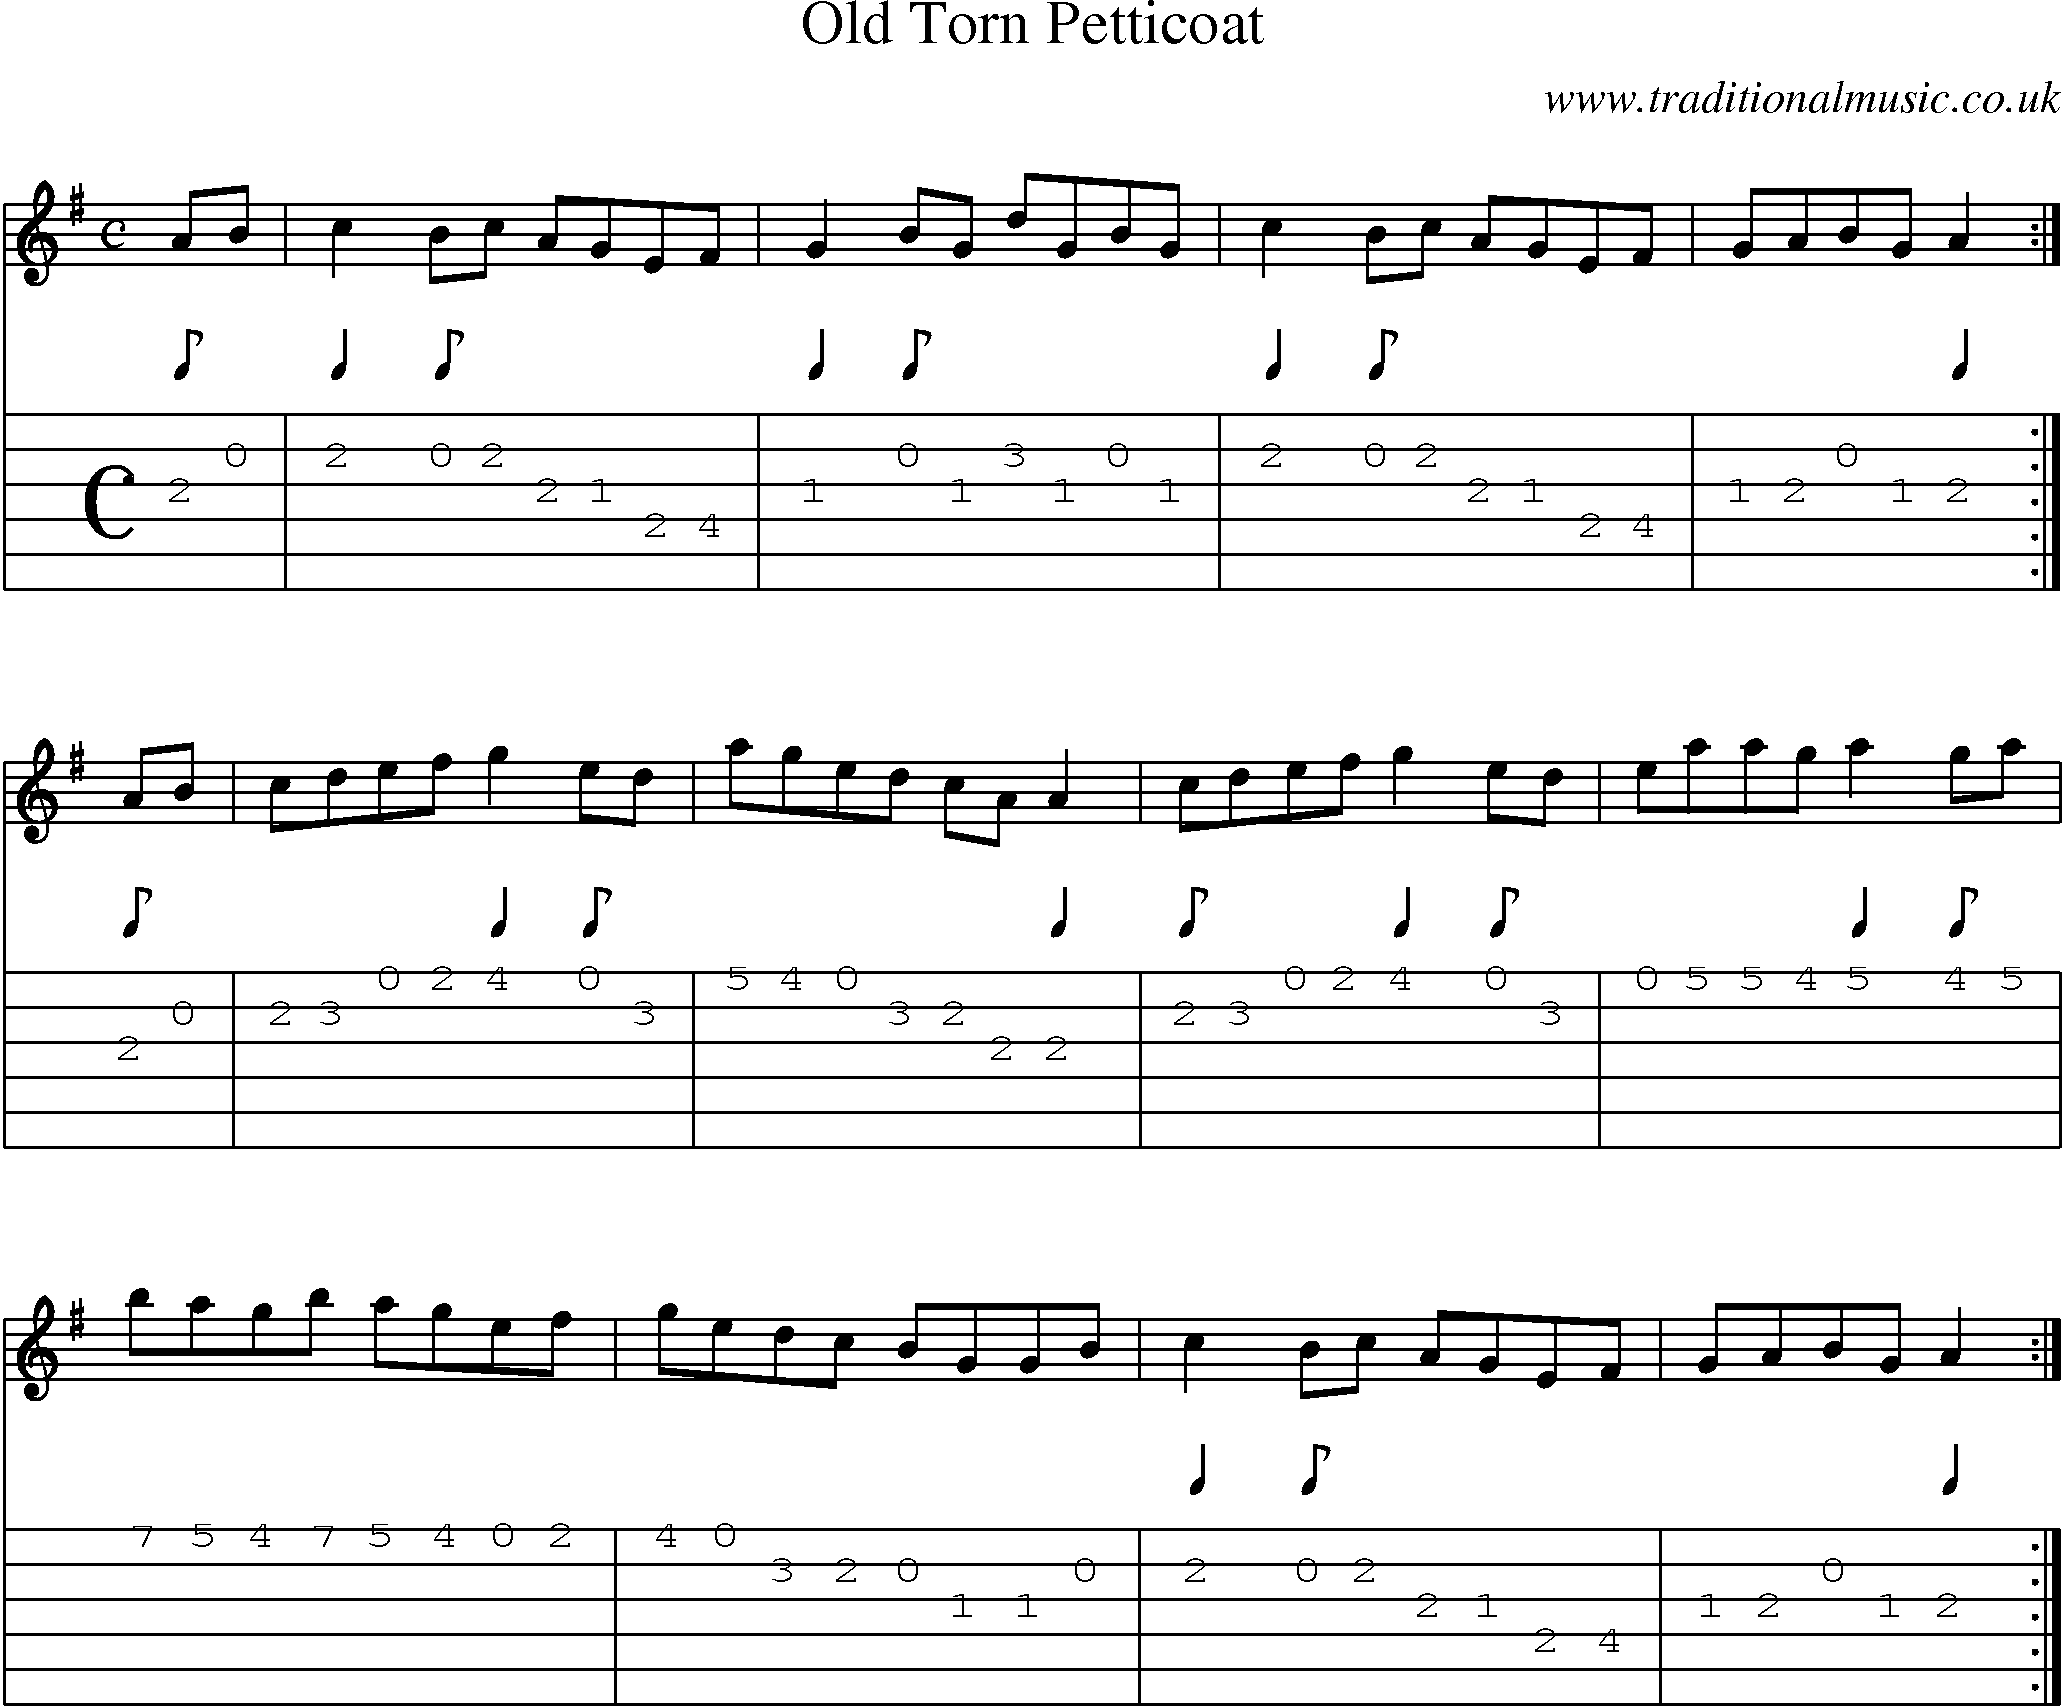 Music Score and Guitar Tabs for Old Torn Petticoat